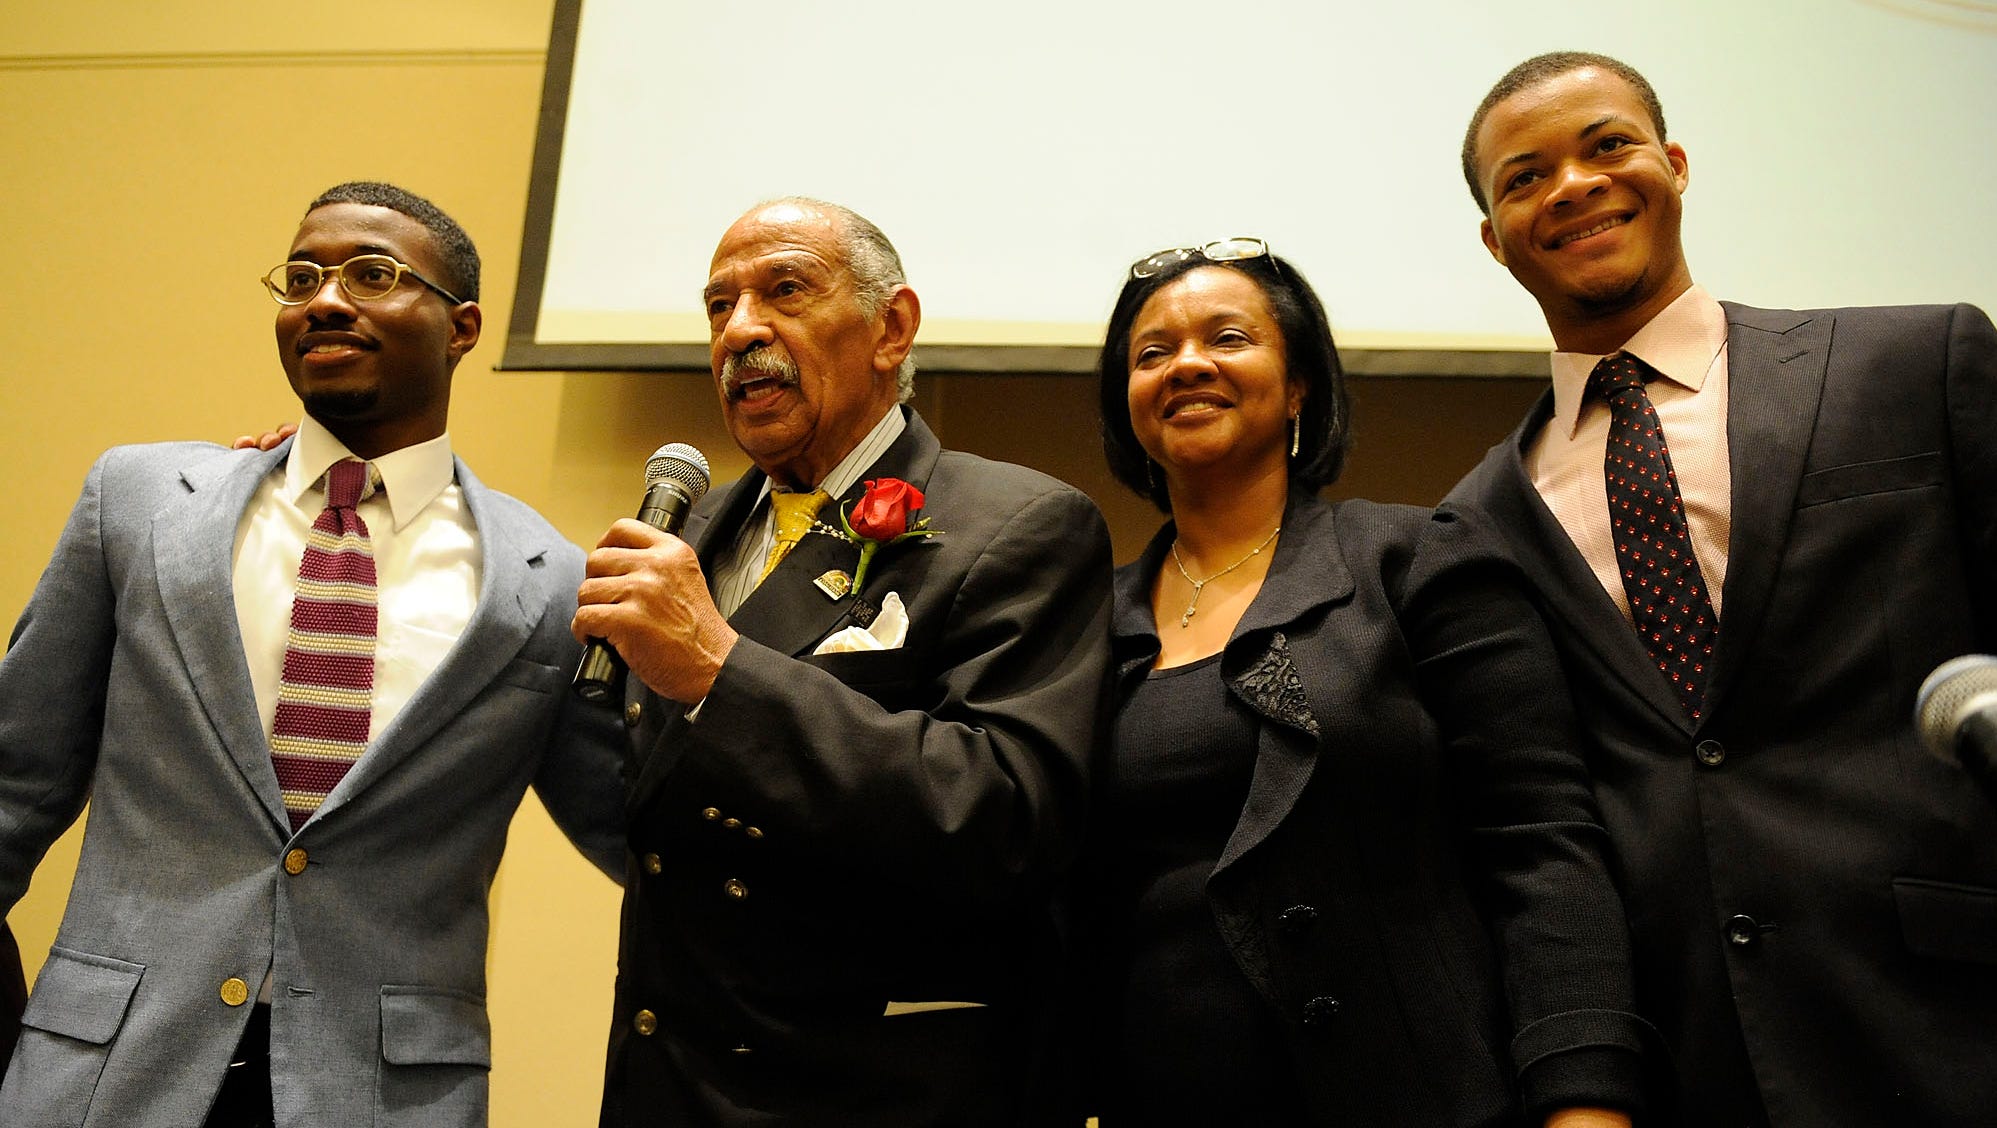 Conyers addresses attendees at a gala and fundraiser in his honor at Greater Grace Temple Church in Detroit, with sons John III and Carl Edward and wife, Monica, on Sunday, Sept. 29, 2013. Political colleagues, civil rights leaders and hundreds of constituents gathered to pay tribute to the then-second-longest-serving member of Congress.